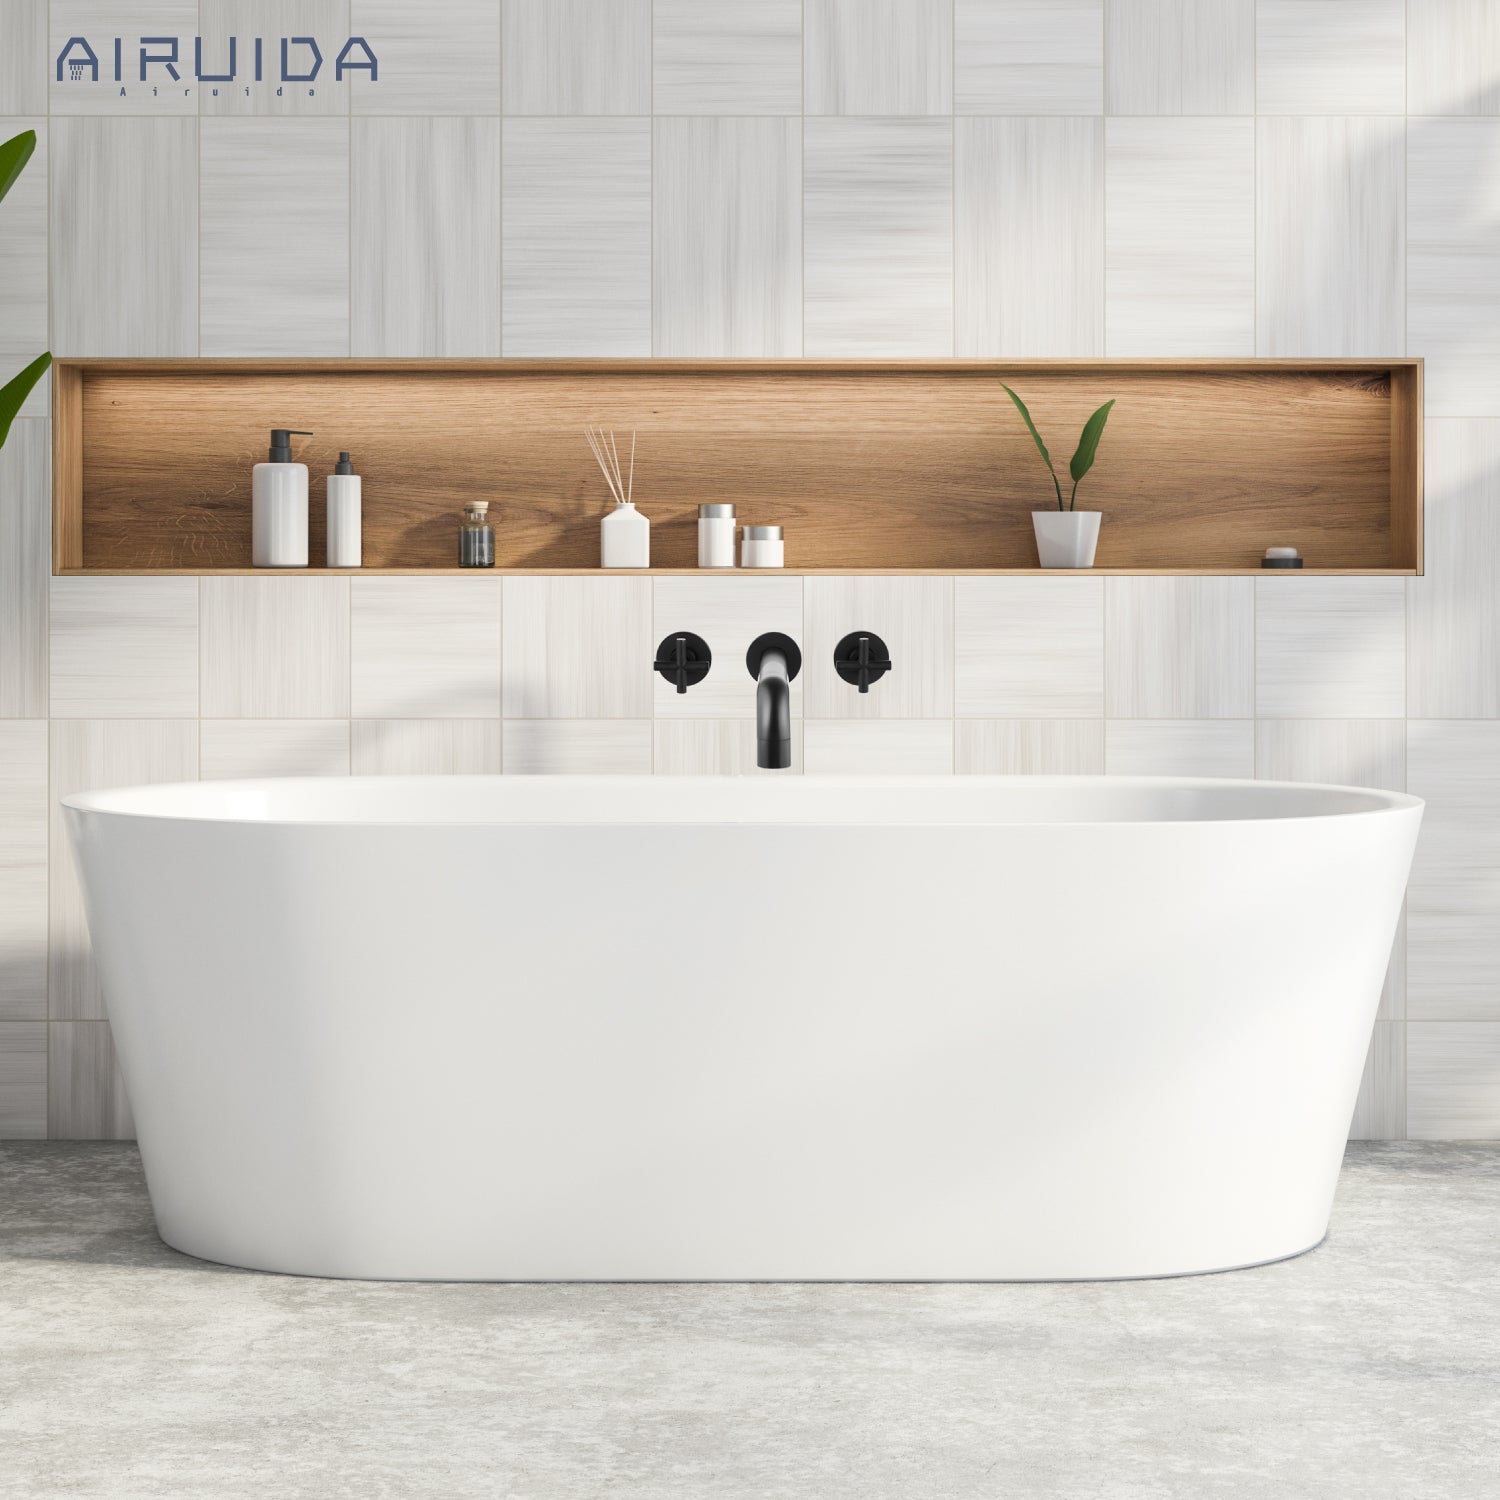 Airuida Wall Mounted Tub Faucet, Wall Mount Tub Filler,Wall Mount Bathtub Faucet with High Flow Two Cross Solid Brass Handles, Long Spout Reach with Rough-in Valve Included